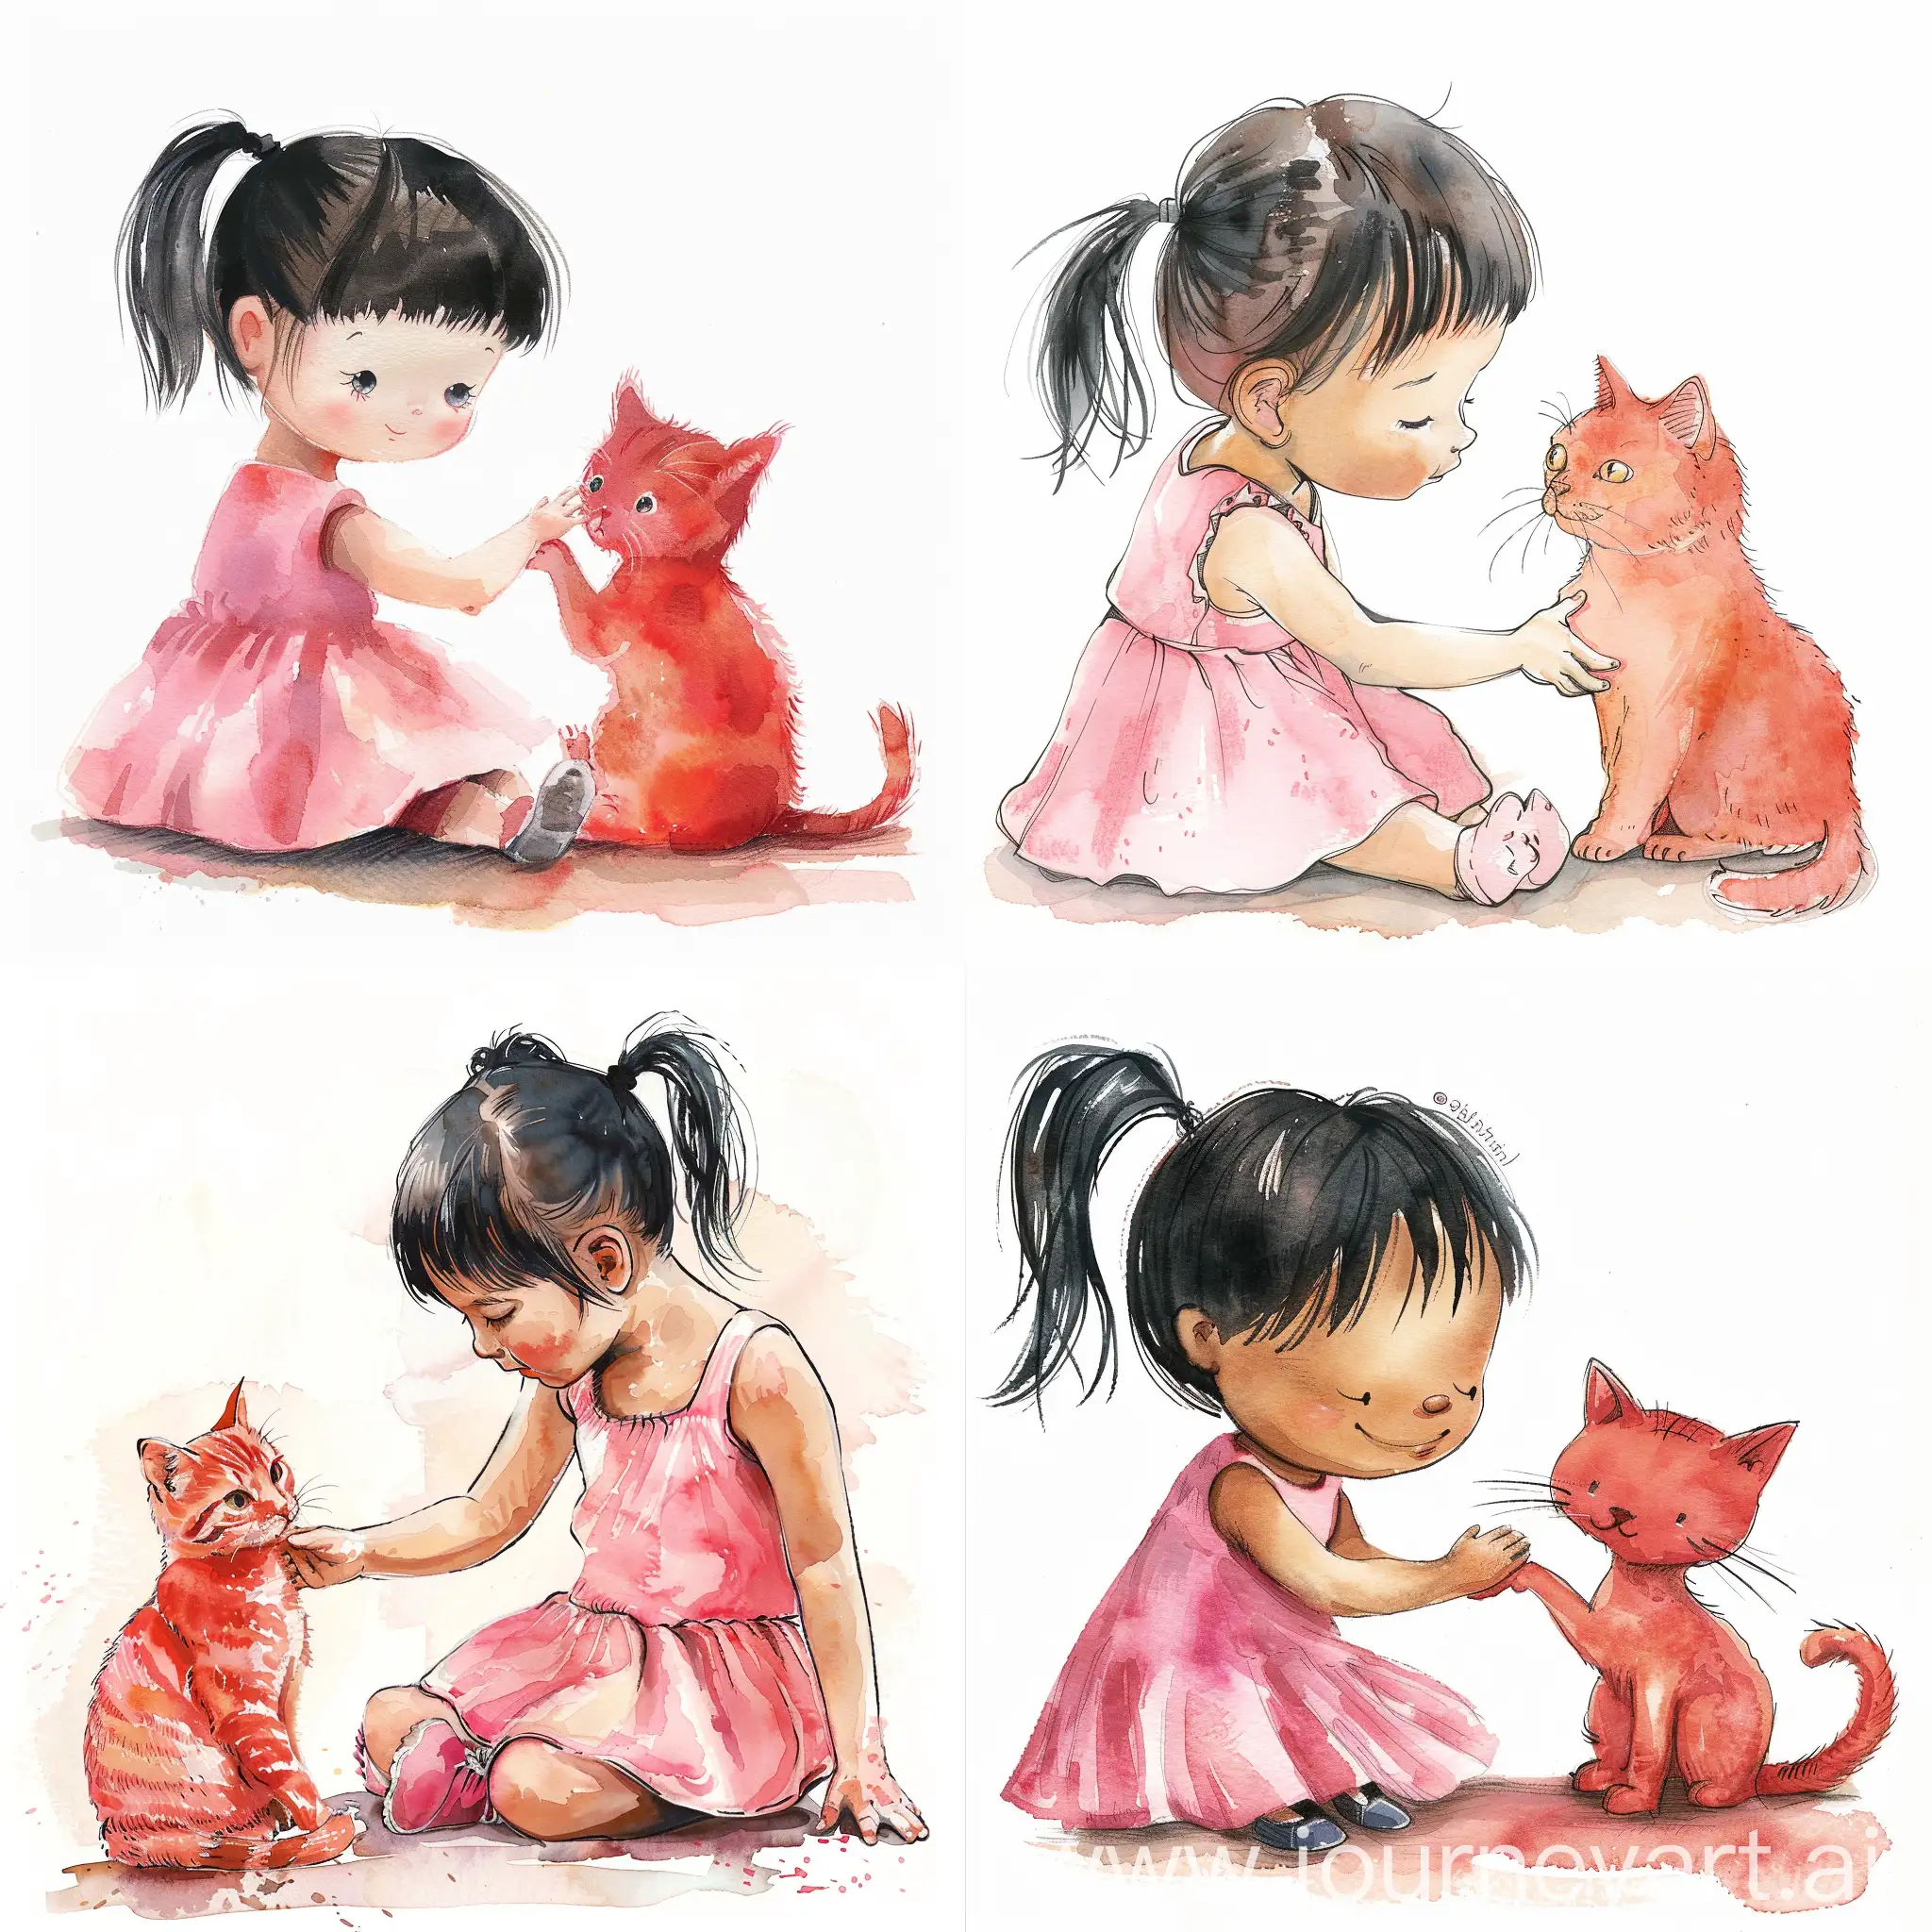 Adorable-Girl-in-Pink-Dress-Stroking-Red-Cat-HighQuality-Watercolor-Art